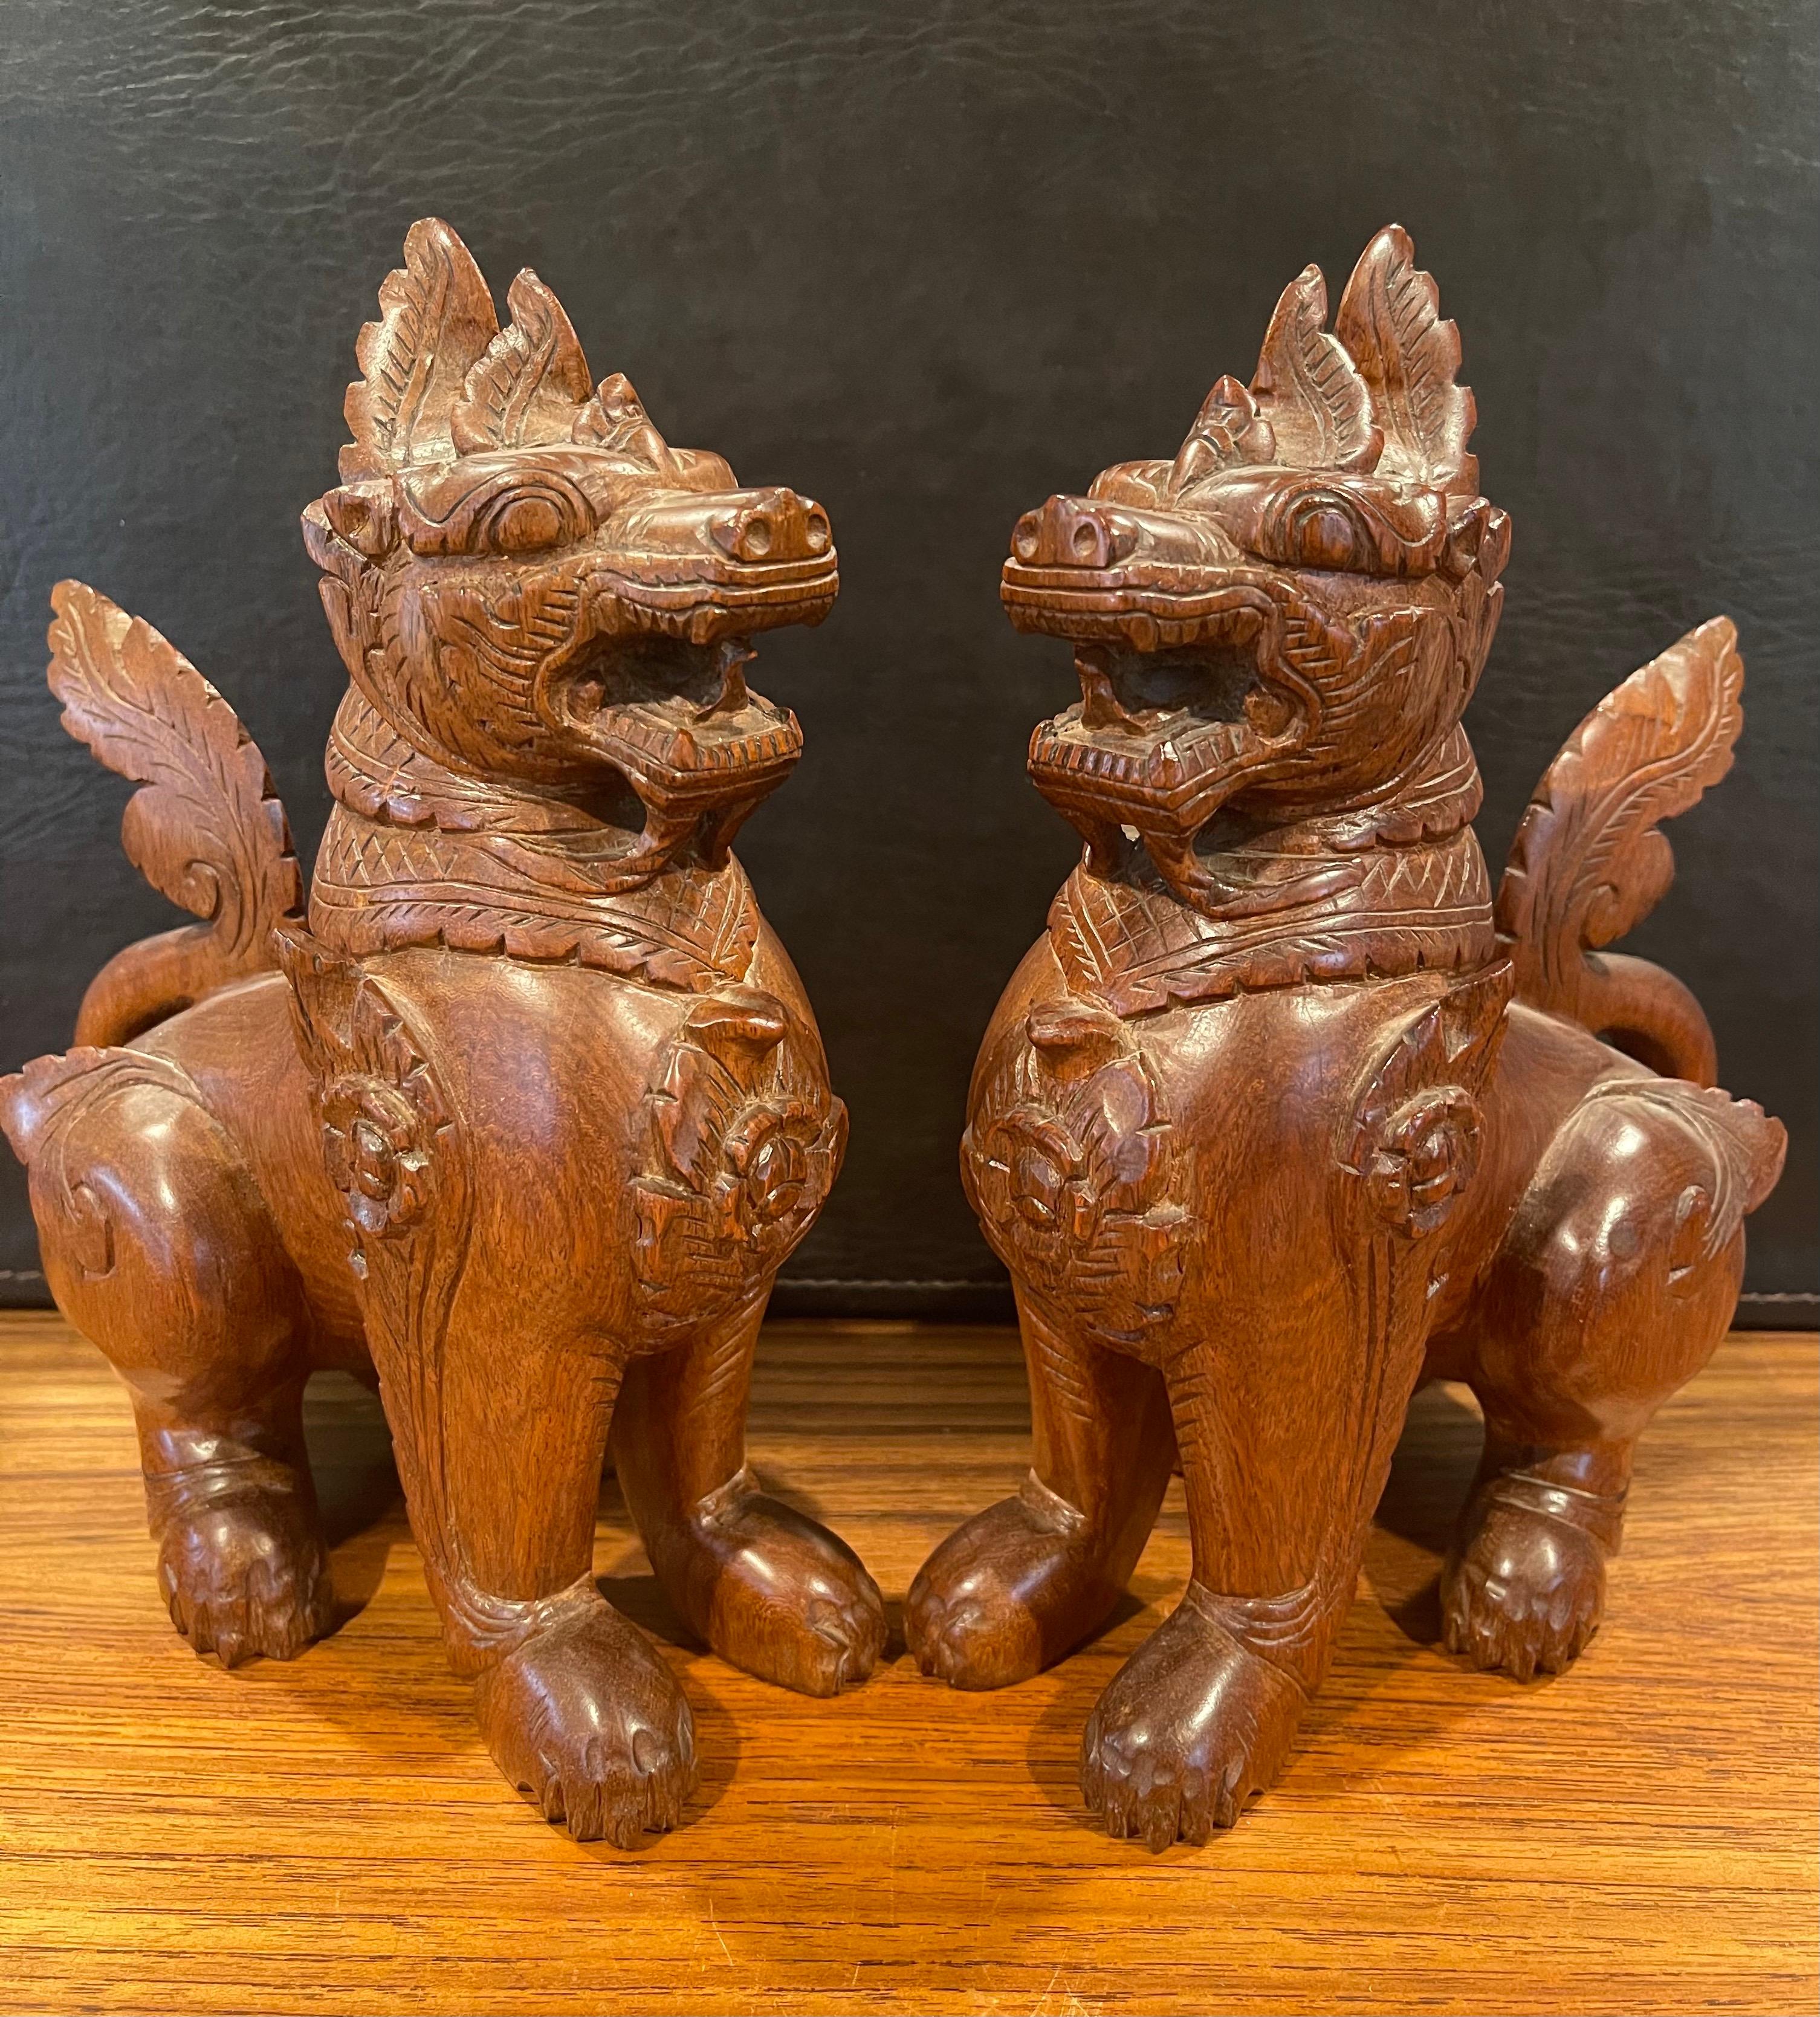 A very nice pair of vintage Chinese hand carved hard wood foo dogs or bookends which I believe are made from mahogany or elm, circa 1970s. The dogs are in very good condition and measure 4.5